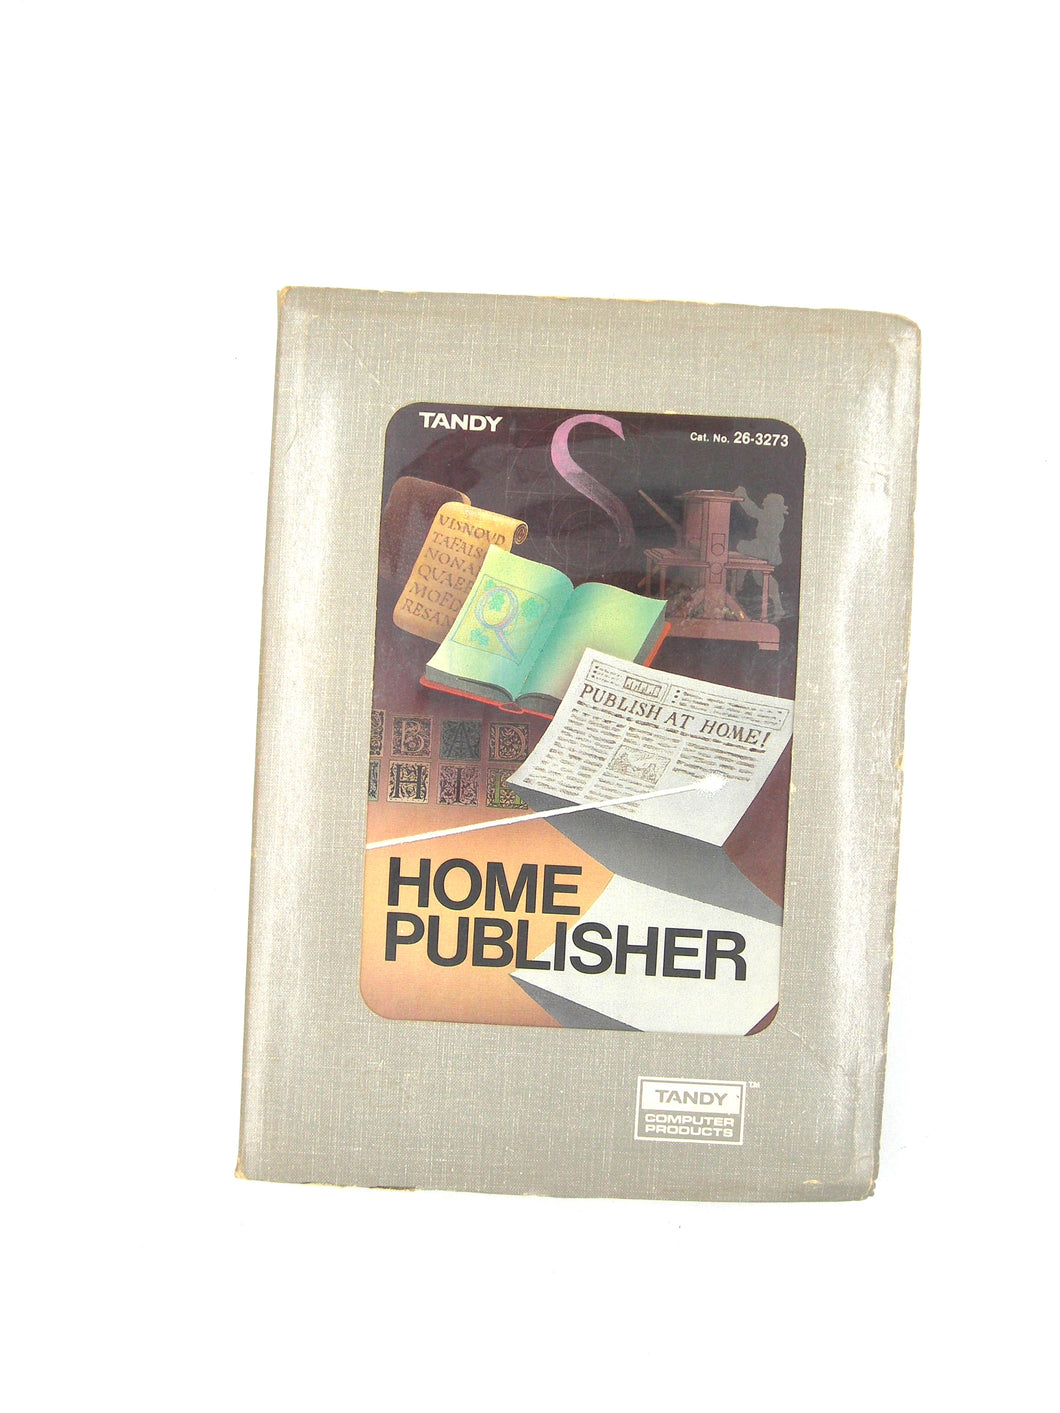 Tandy Color Computer 3 Home Publisher 26-3273 (new,open)